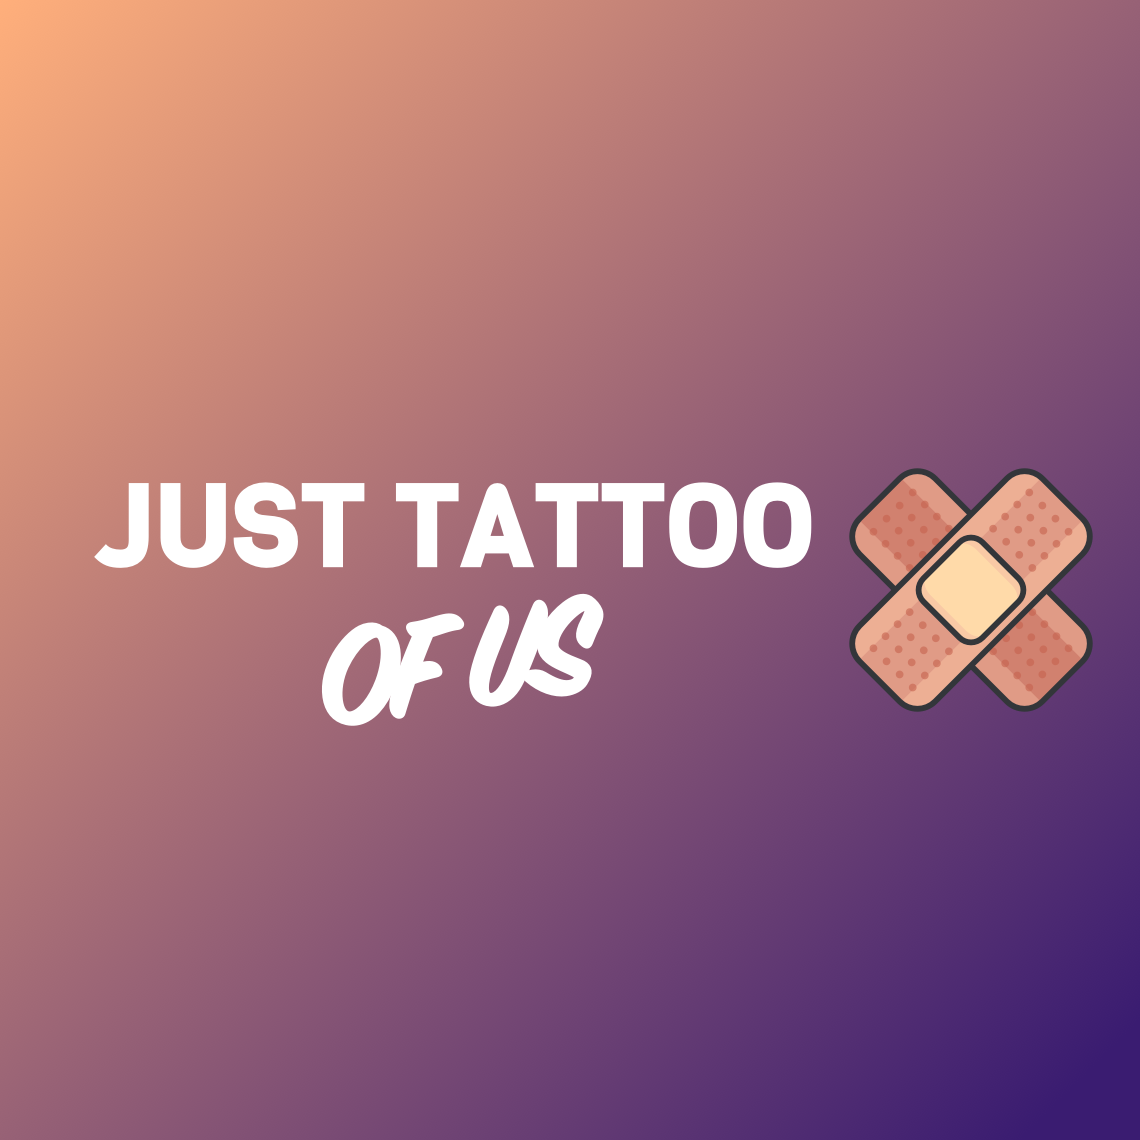 Just Tattoo Of Us: 7 most SHOCKING tattoos - belly button, dumped, STI!